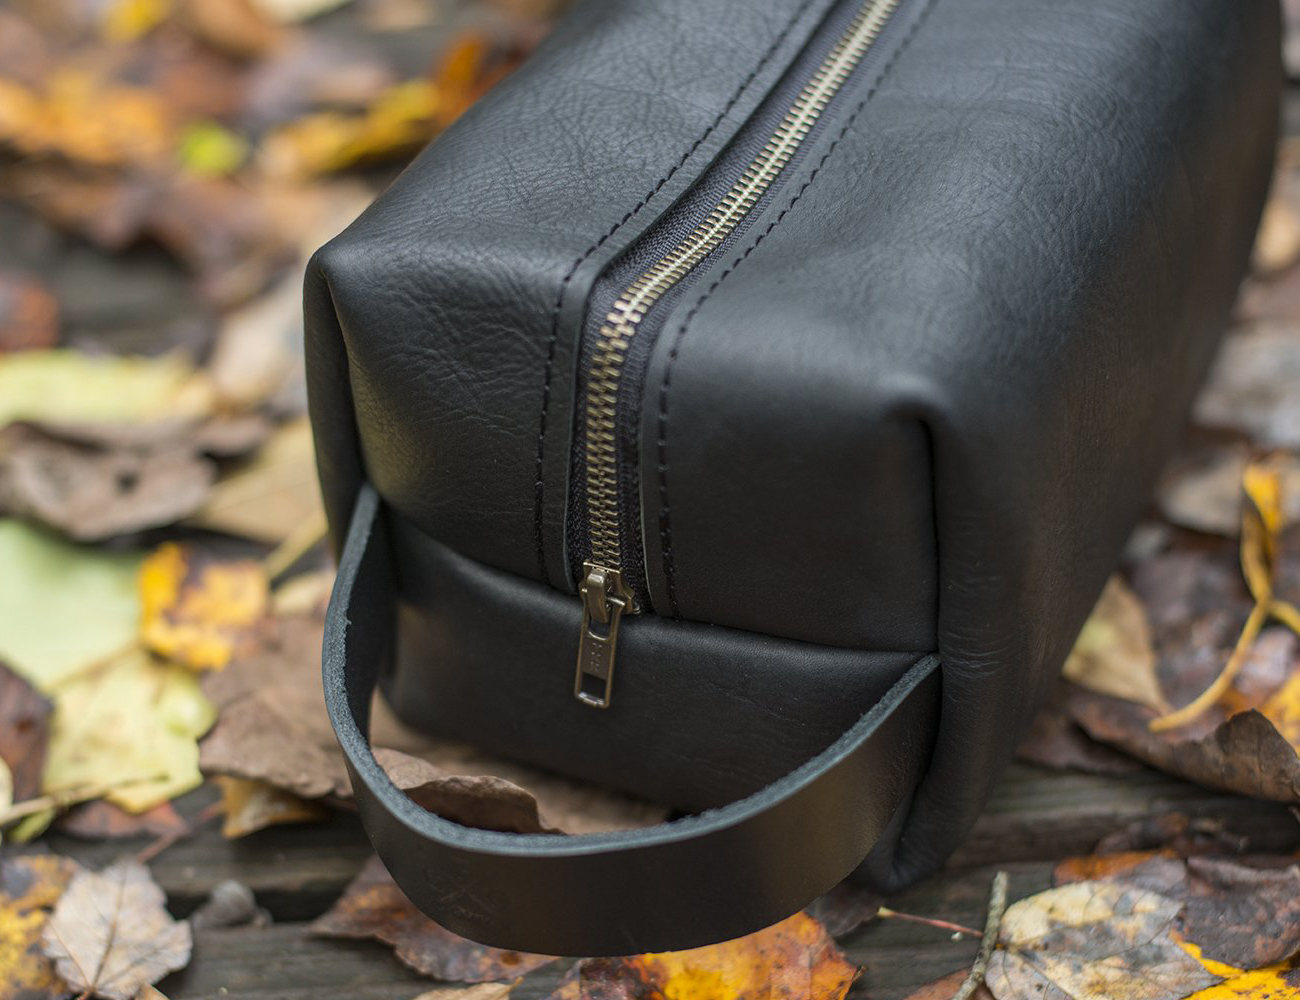 The Leather Dopp Kit by Go Forth Goods